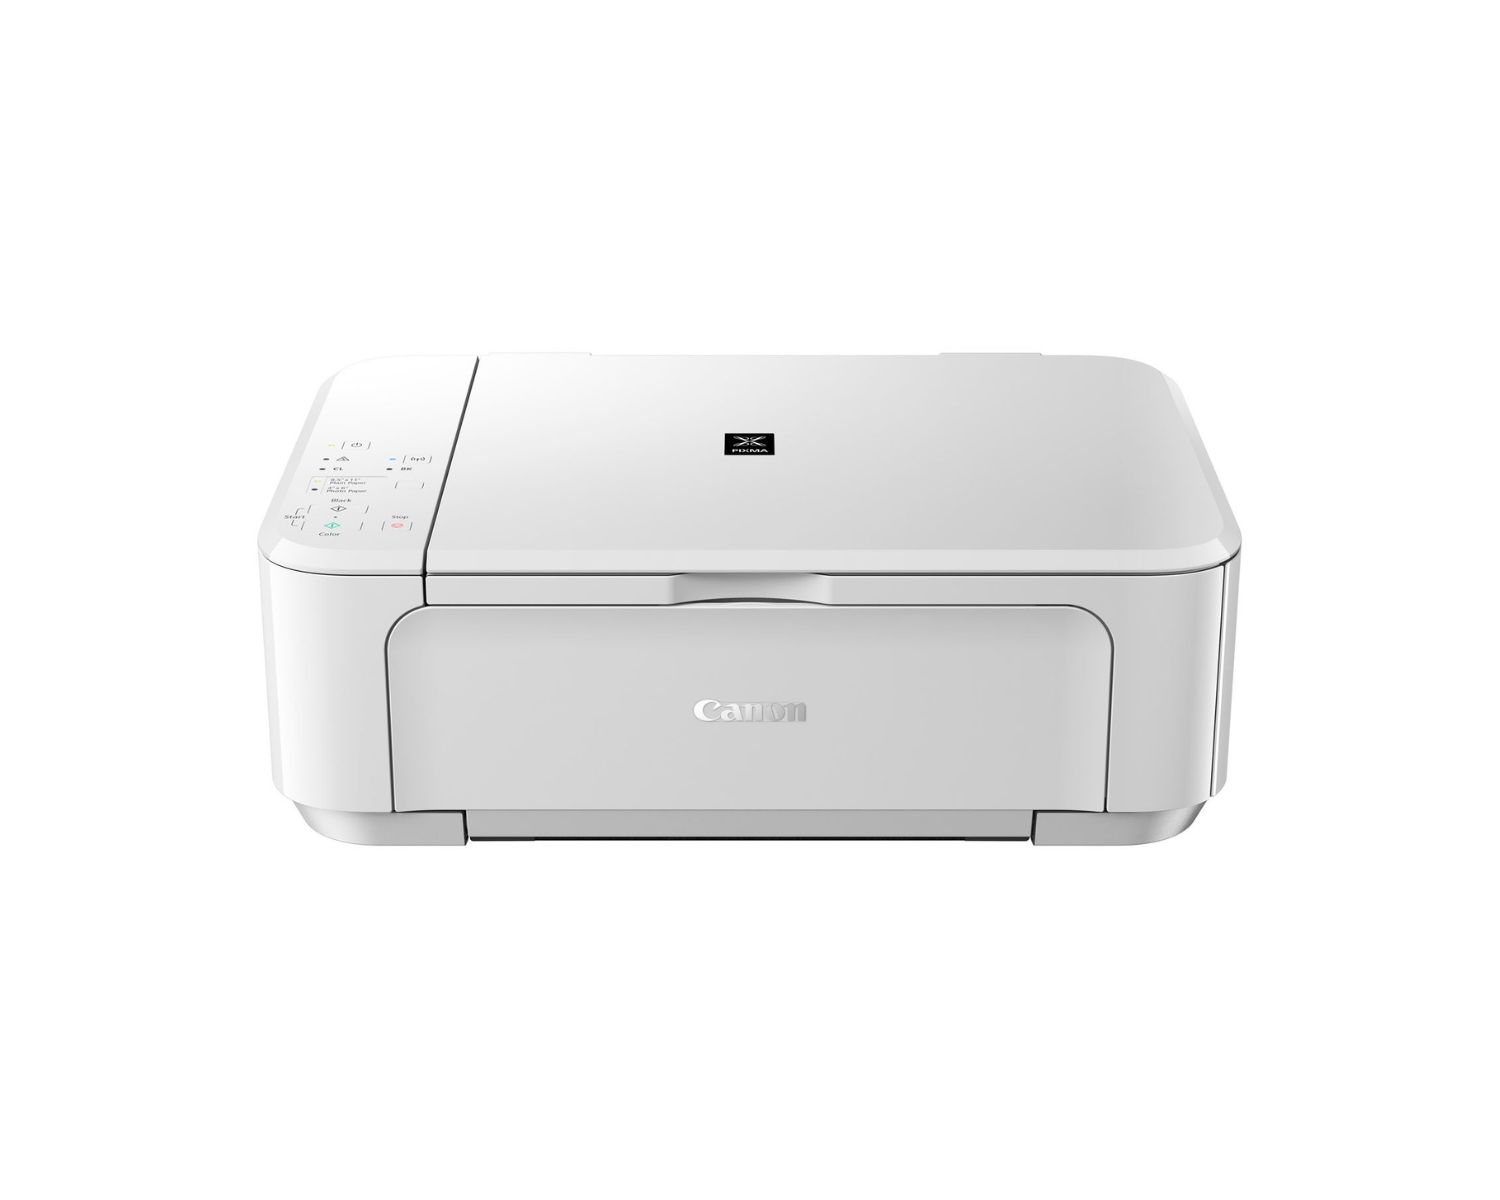 How Do I Connect My Canon Mg3520 Wireless Printer?